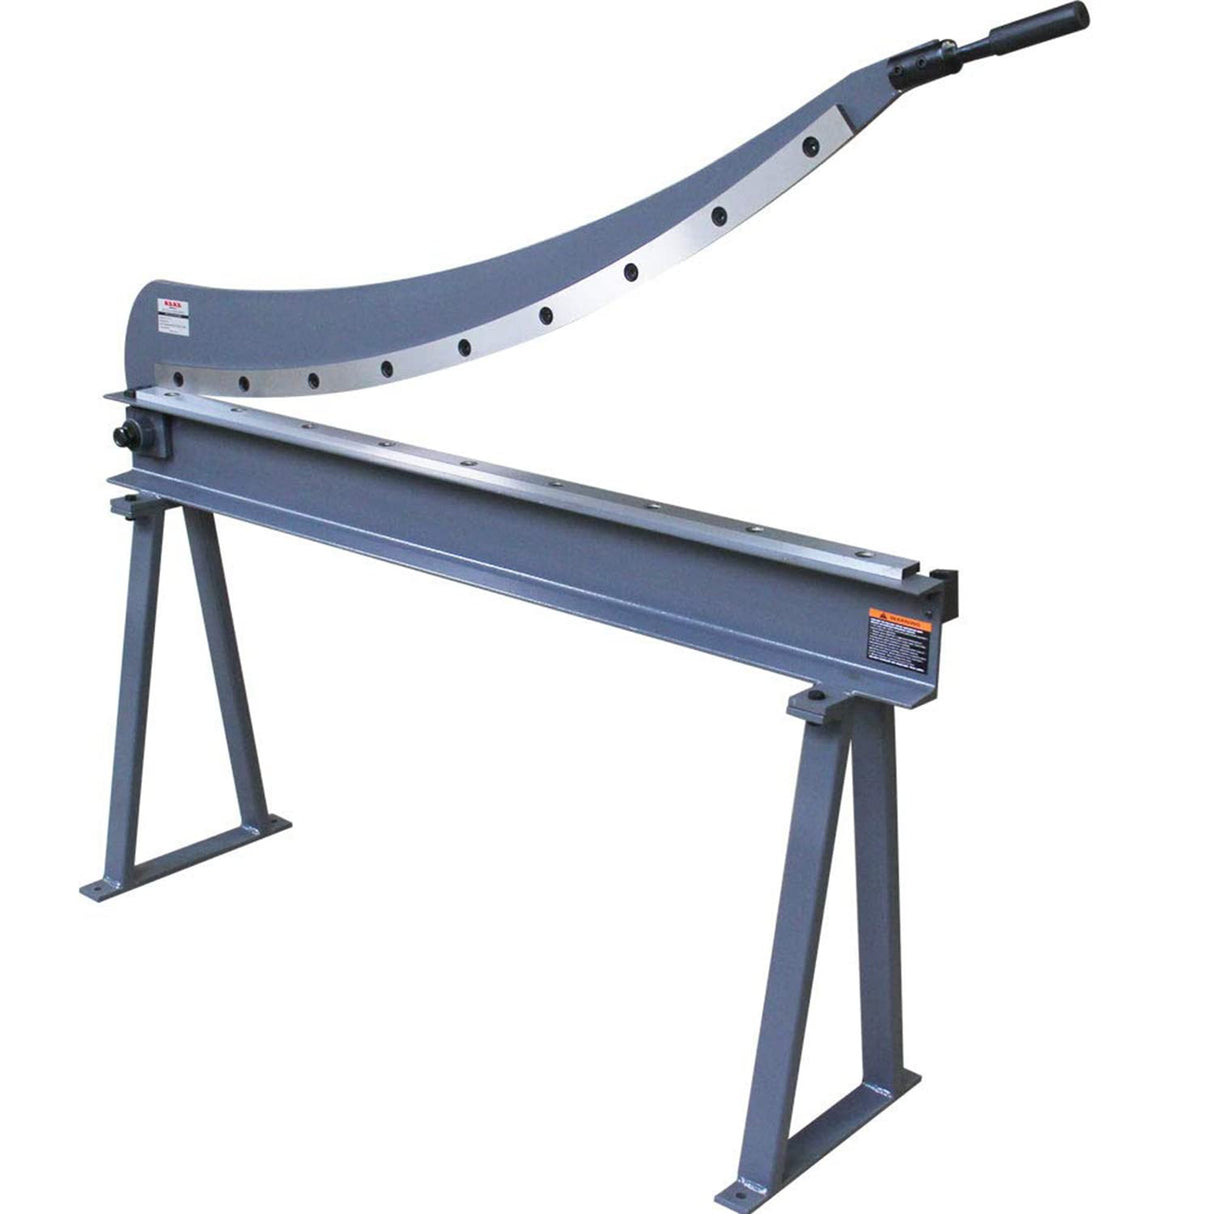 Cut with Confidence: Our Guillotine Shear is Designed to Make Quick Work of Metal Sheets and Plates